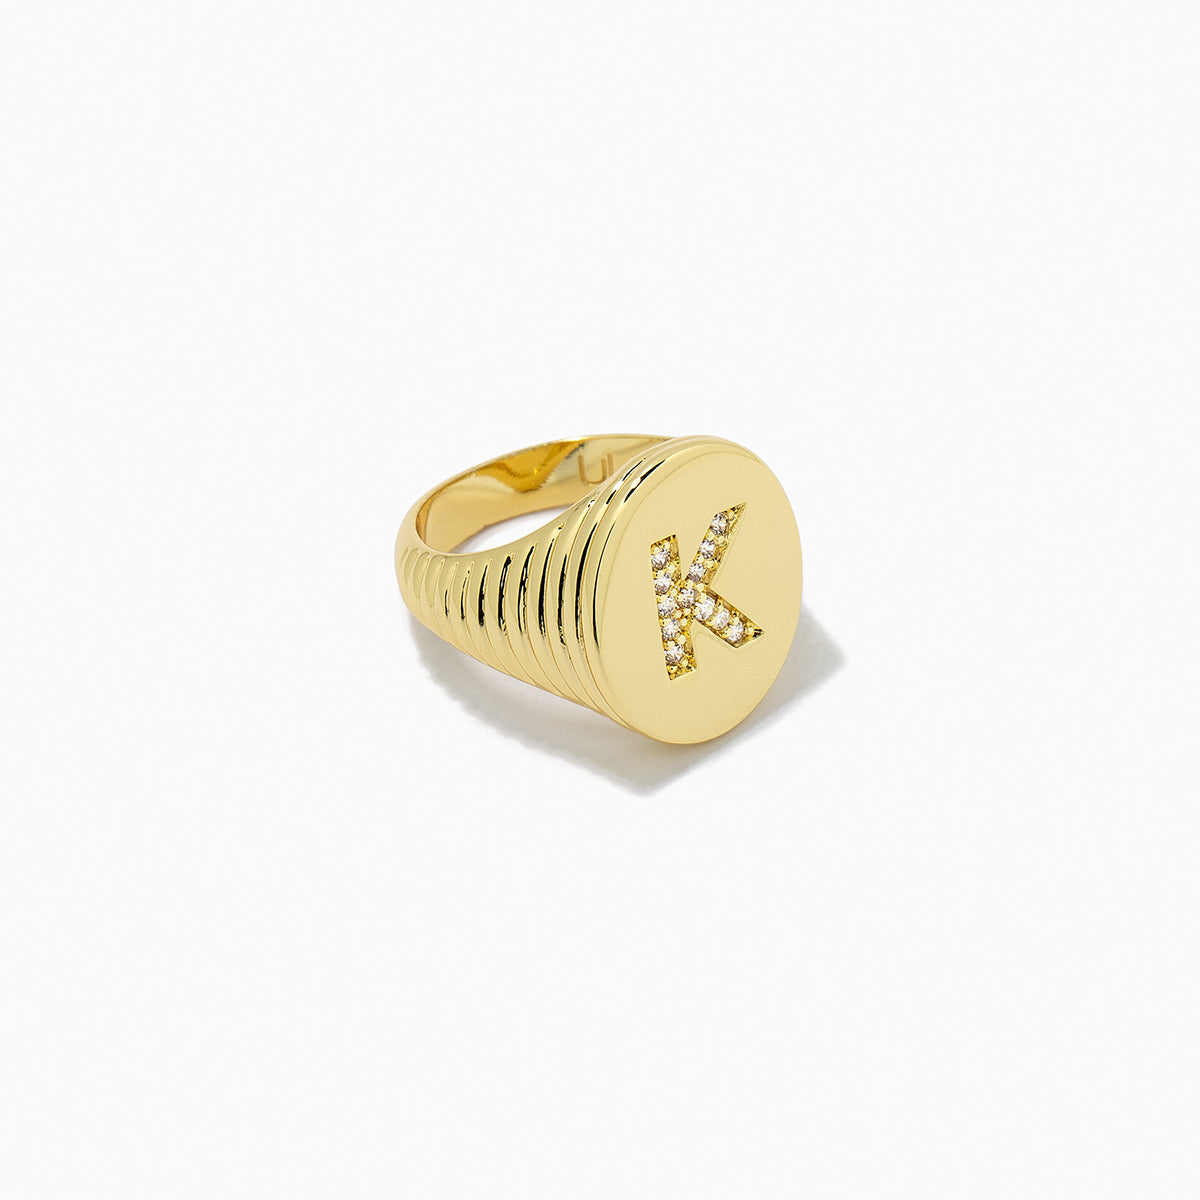 Why Am I Here And Not Somewhere Else - Gold Vermeil Ring | Completedworks